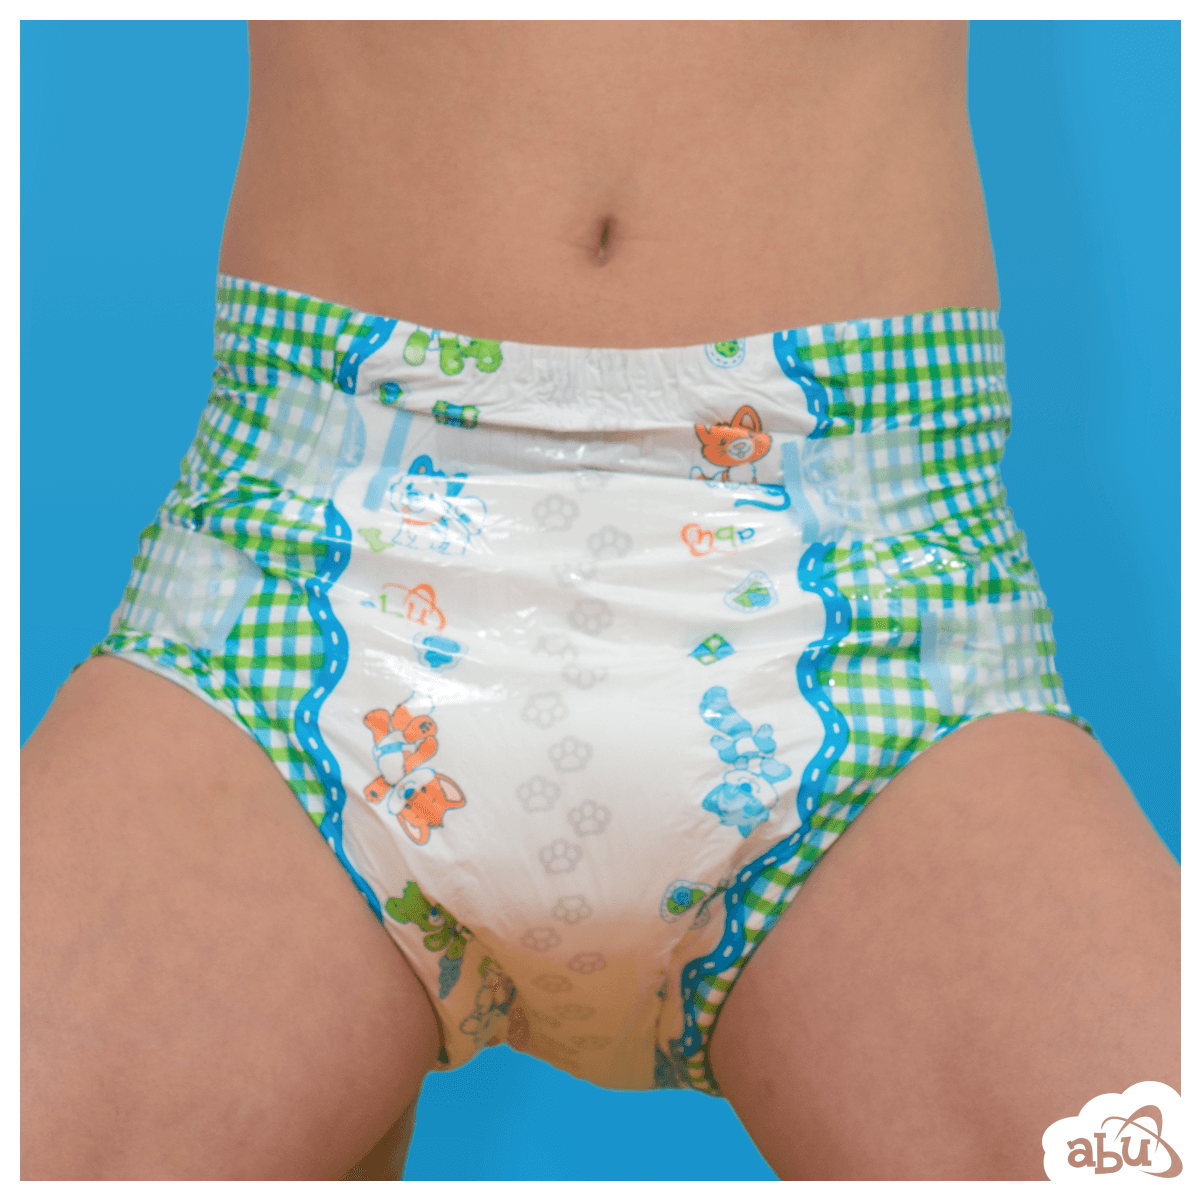 ABDL Adult Baby Diaper Style Woman Panties Little Bunny 